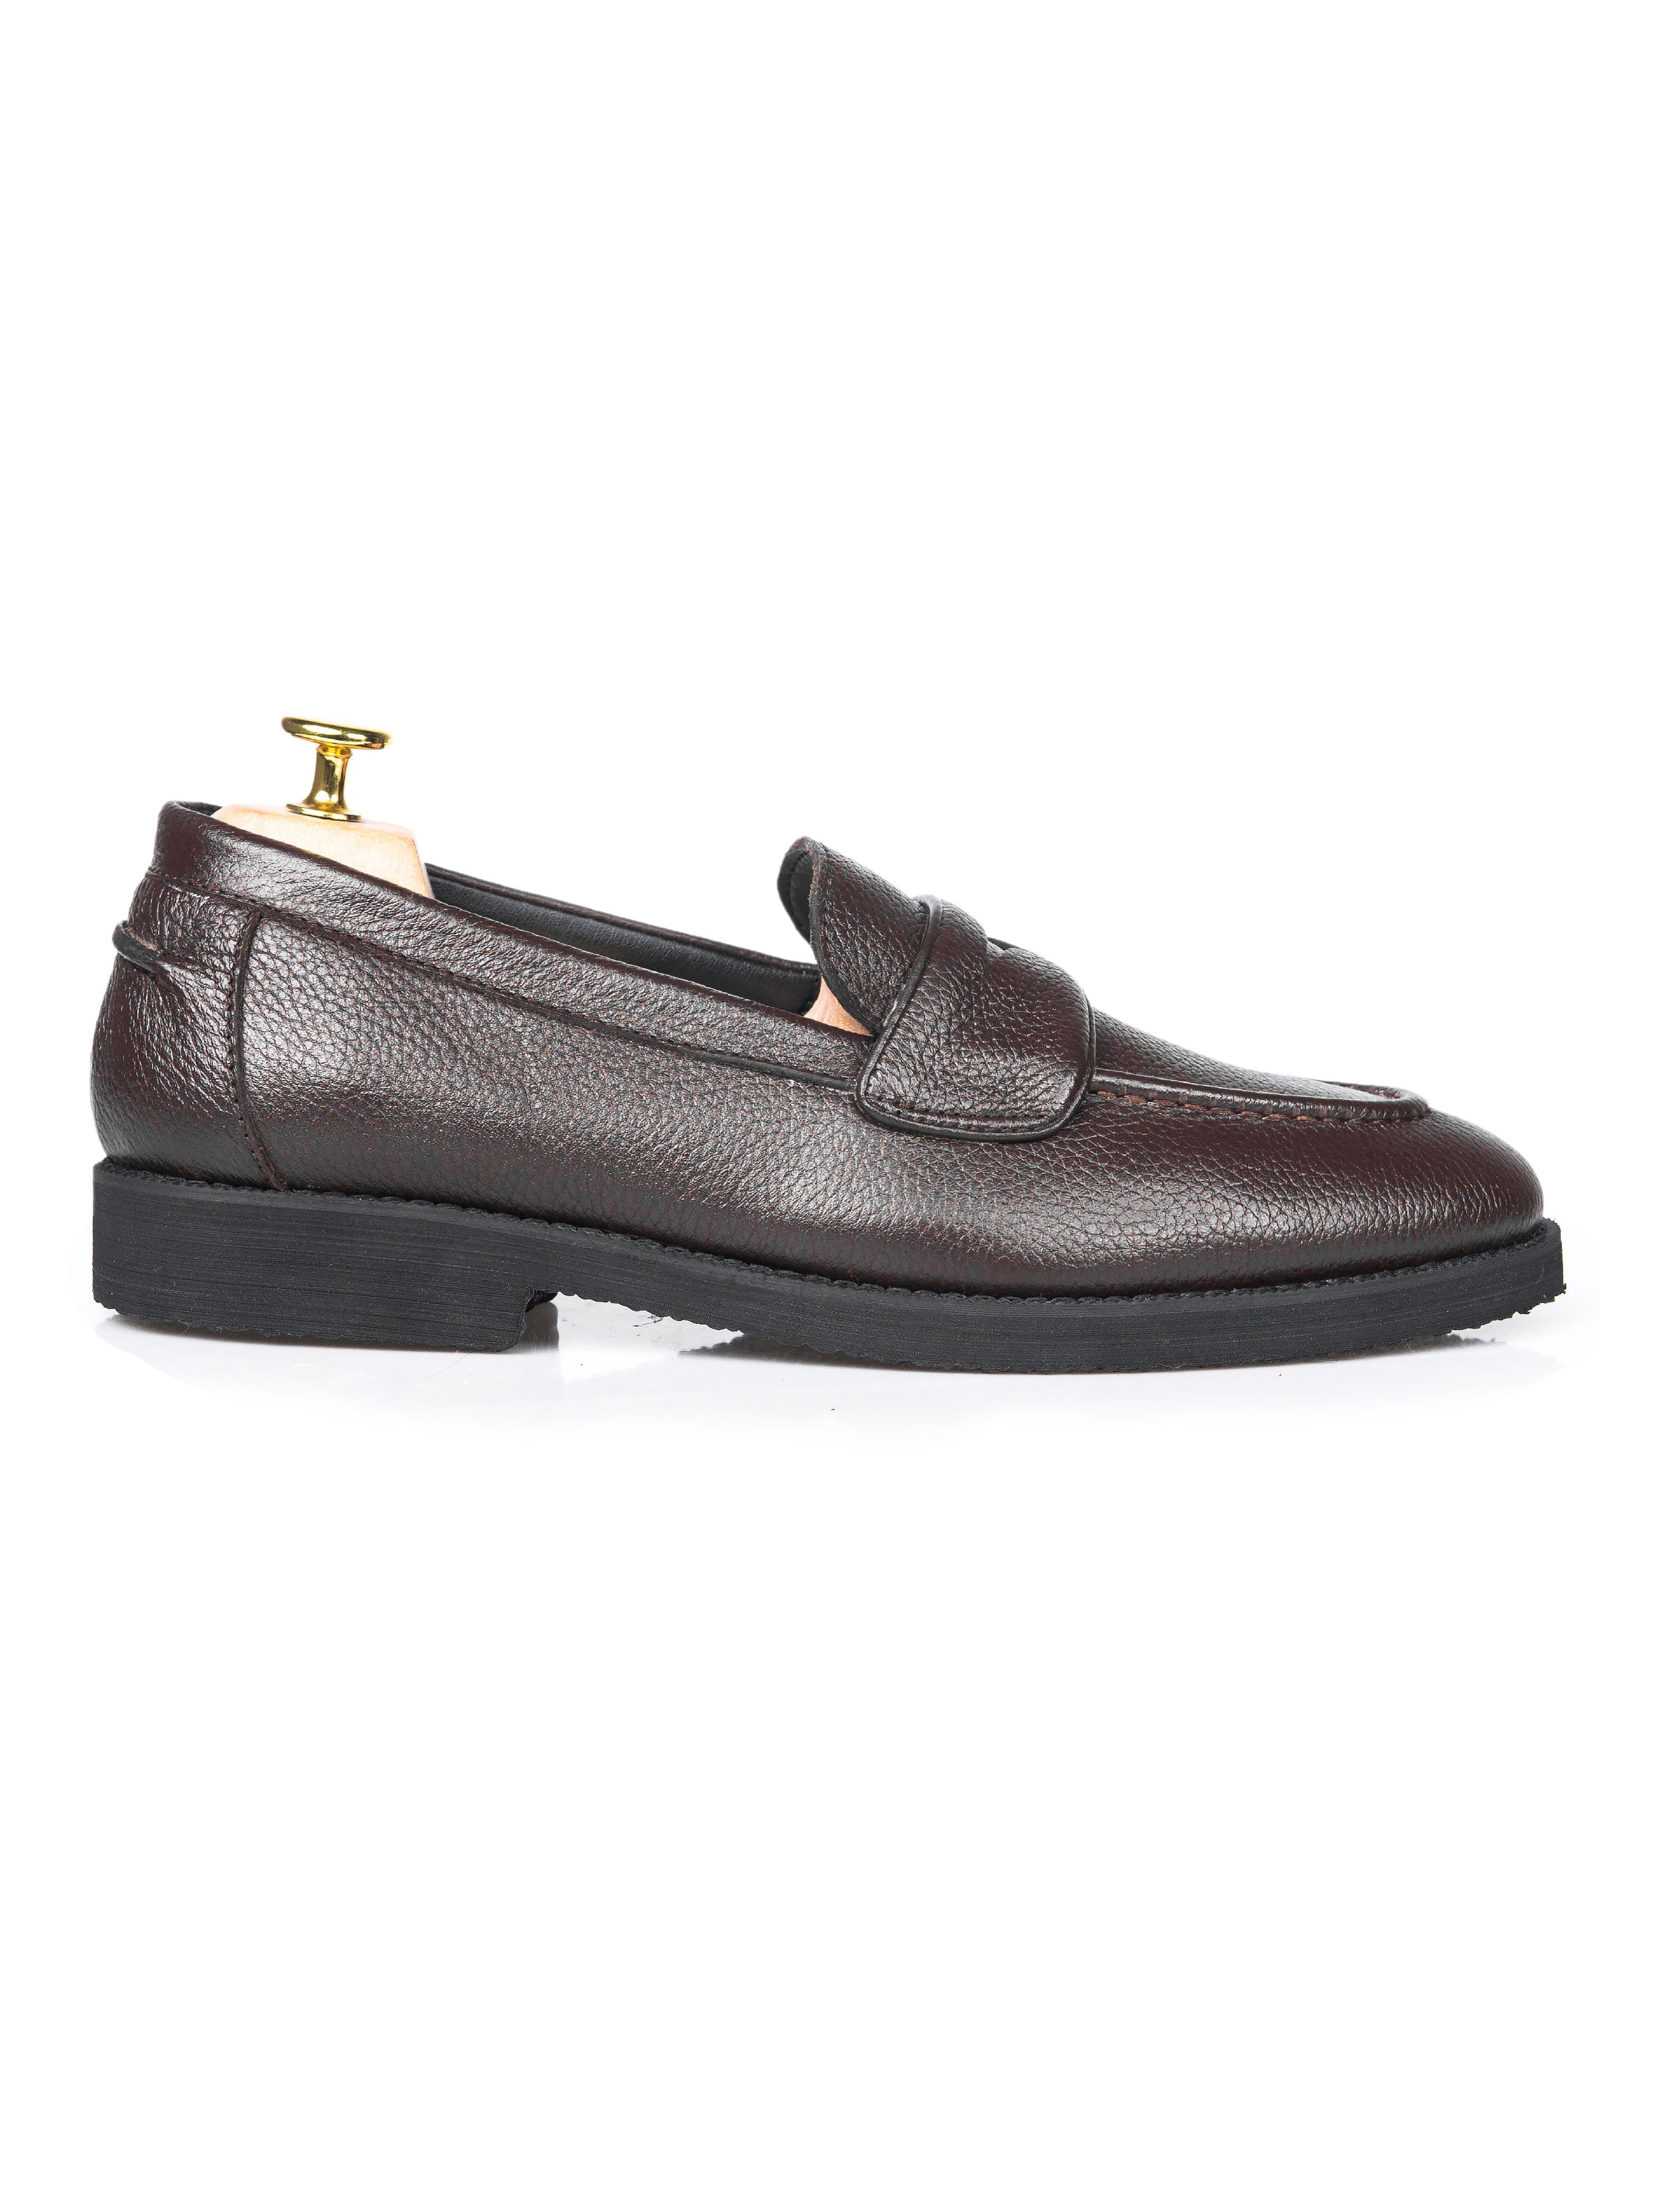 Wayne Penny Loafer - Coffee Pebble Grain Leather (Crepe Sole) - Zeve Shoes